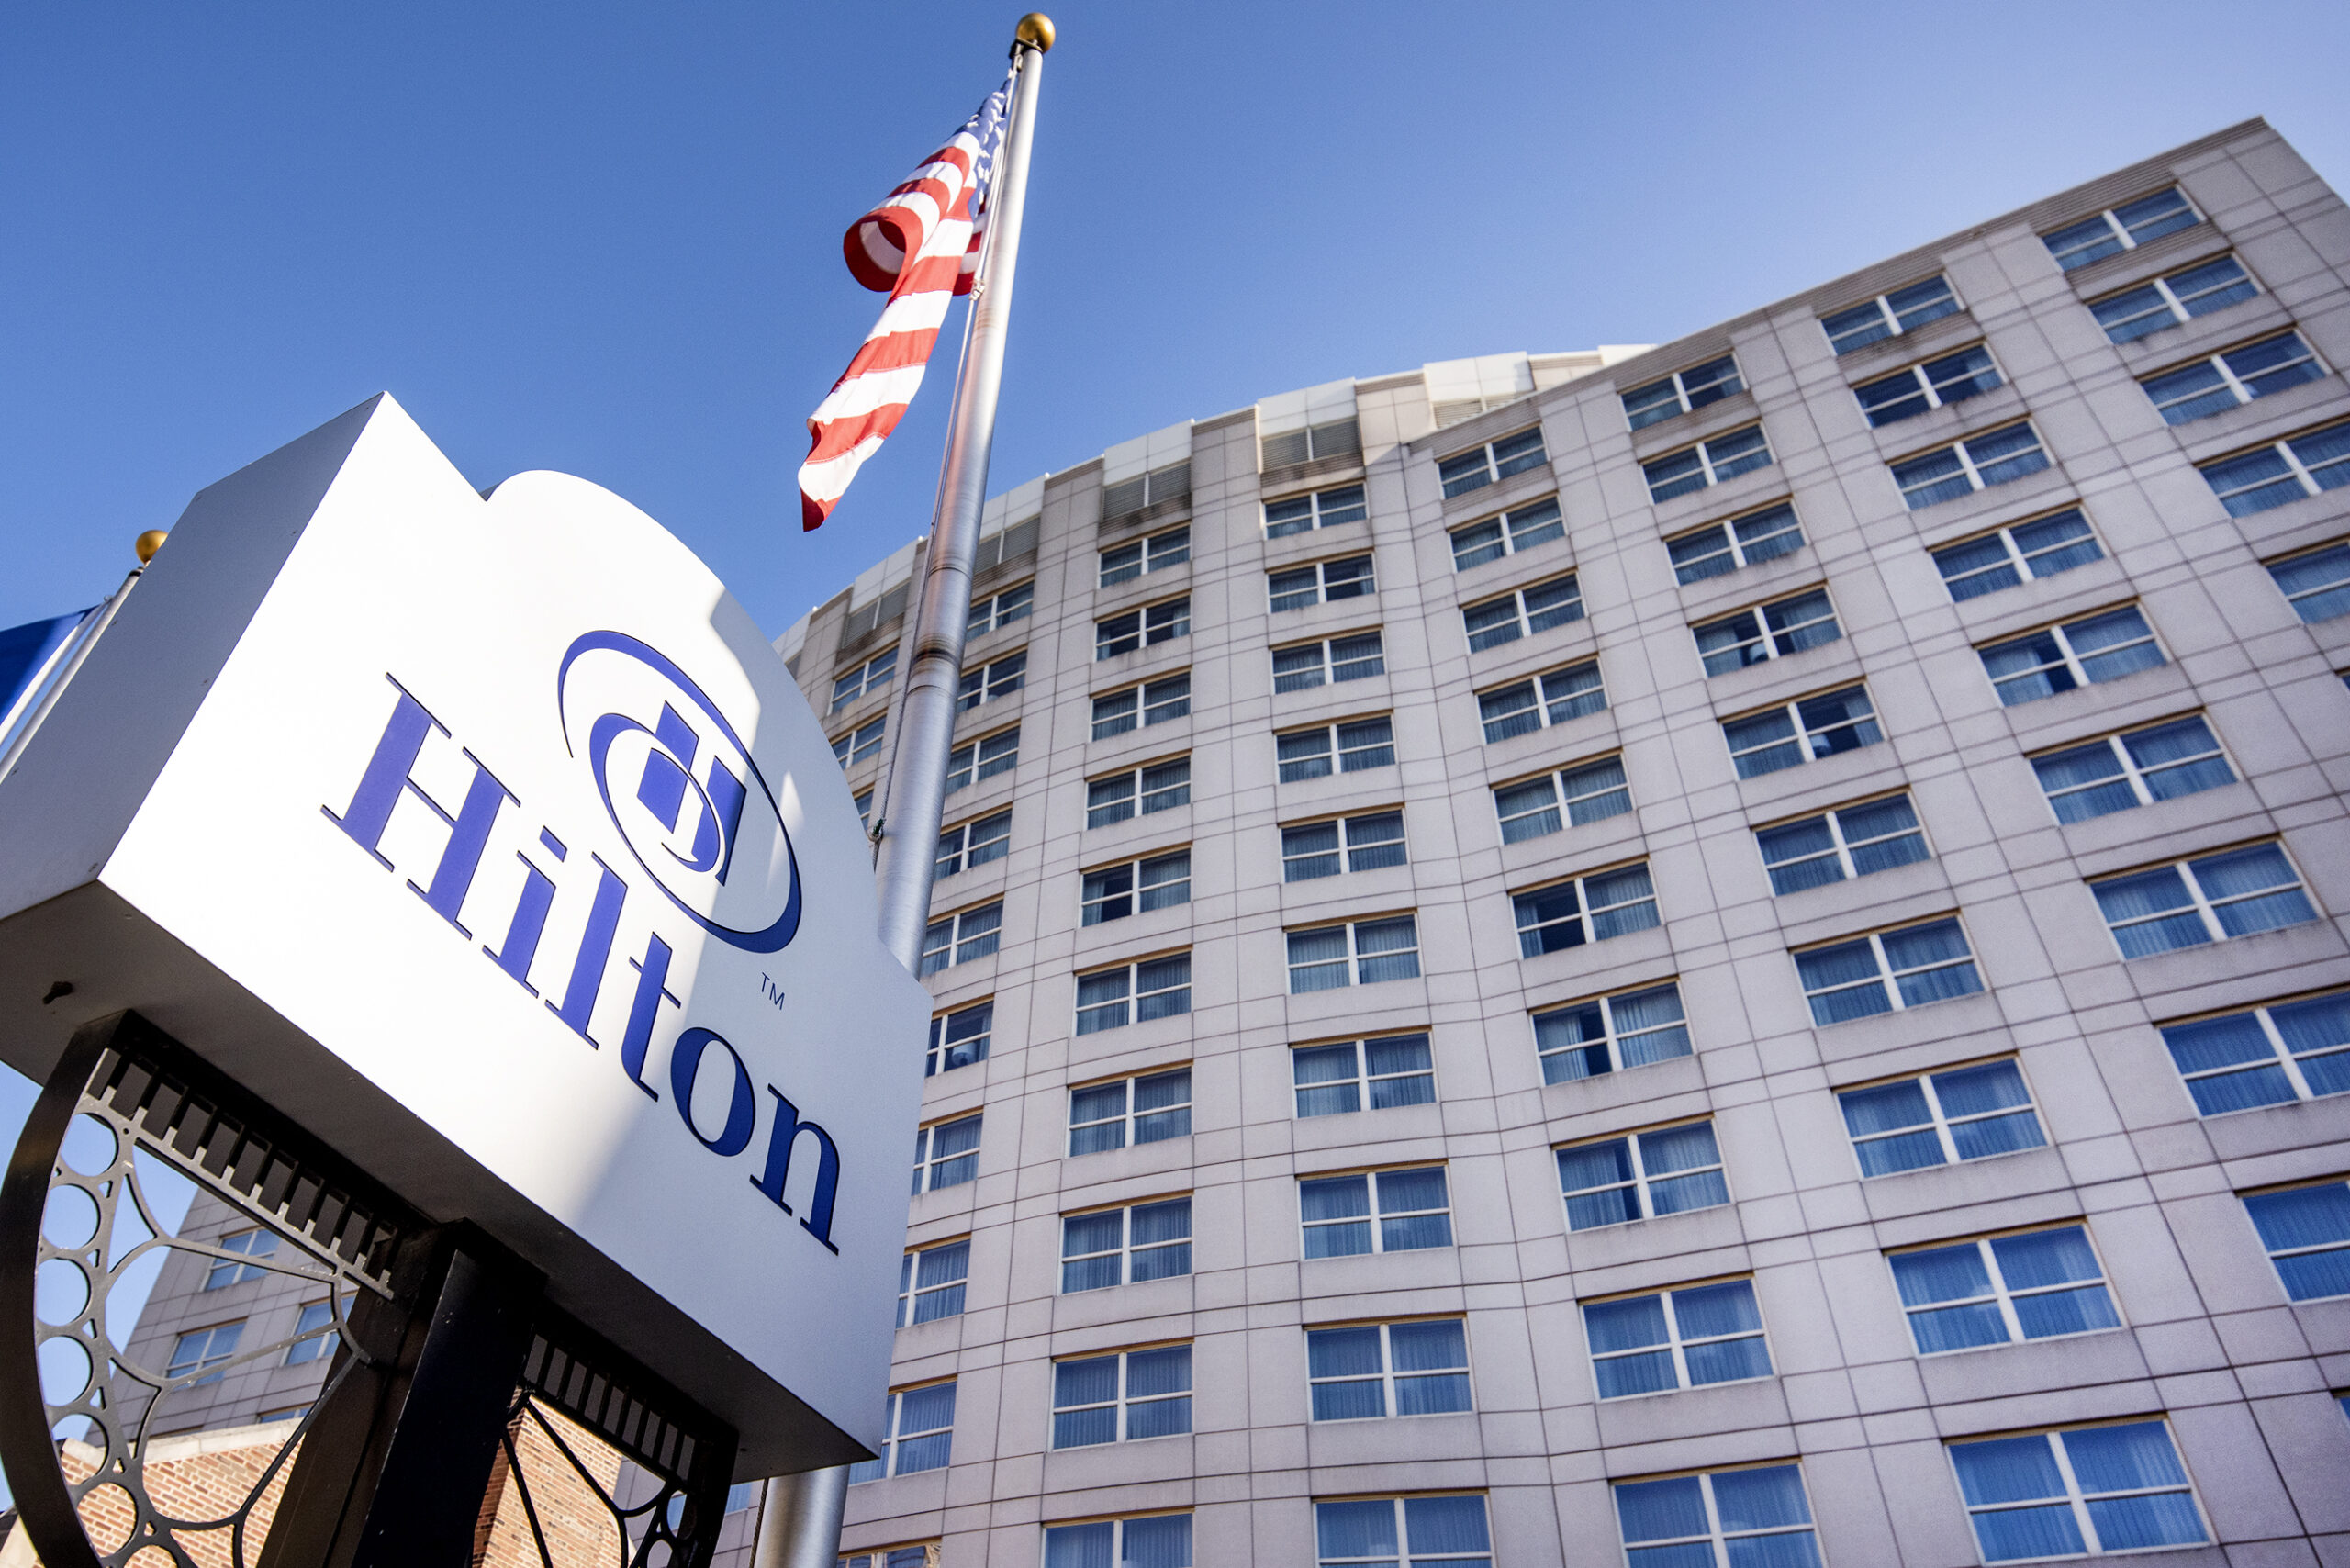 A sign that says "Hilton" can be seen in front of a tall building